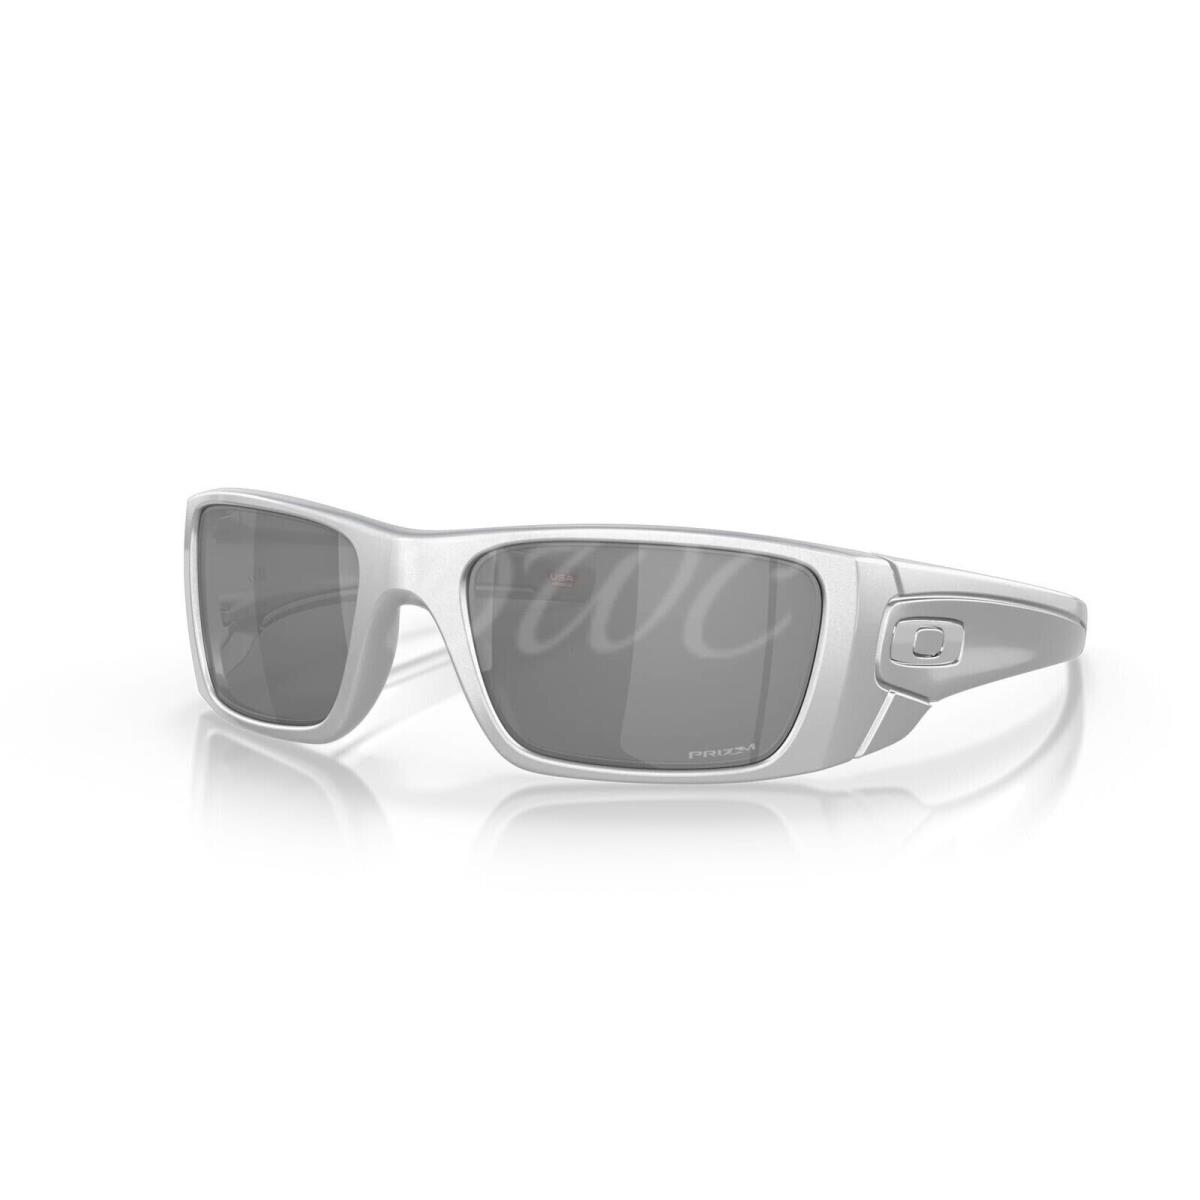 Oakley Fuel Cell Sunglasses X-silver with Prizm Blk Lens 9096M660 Mens Eyewear